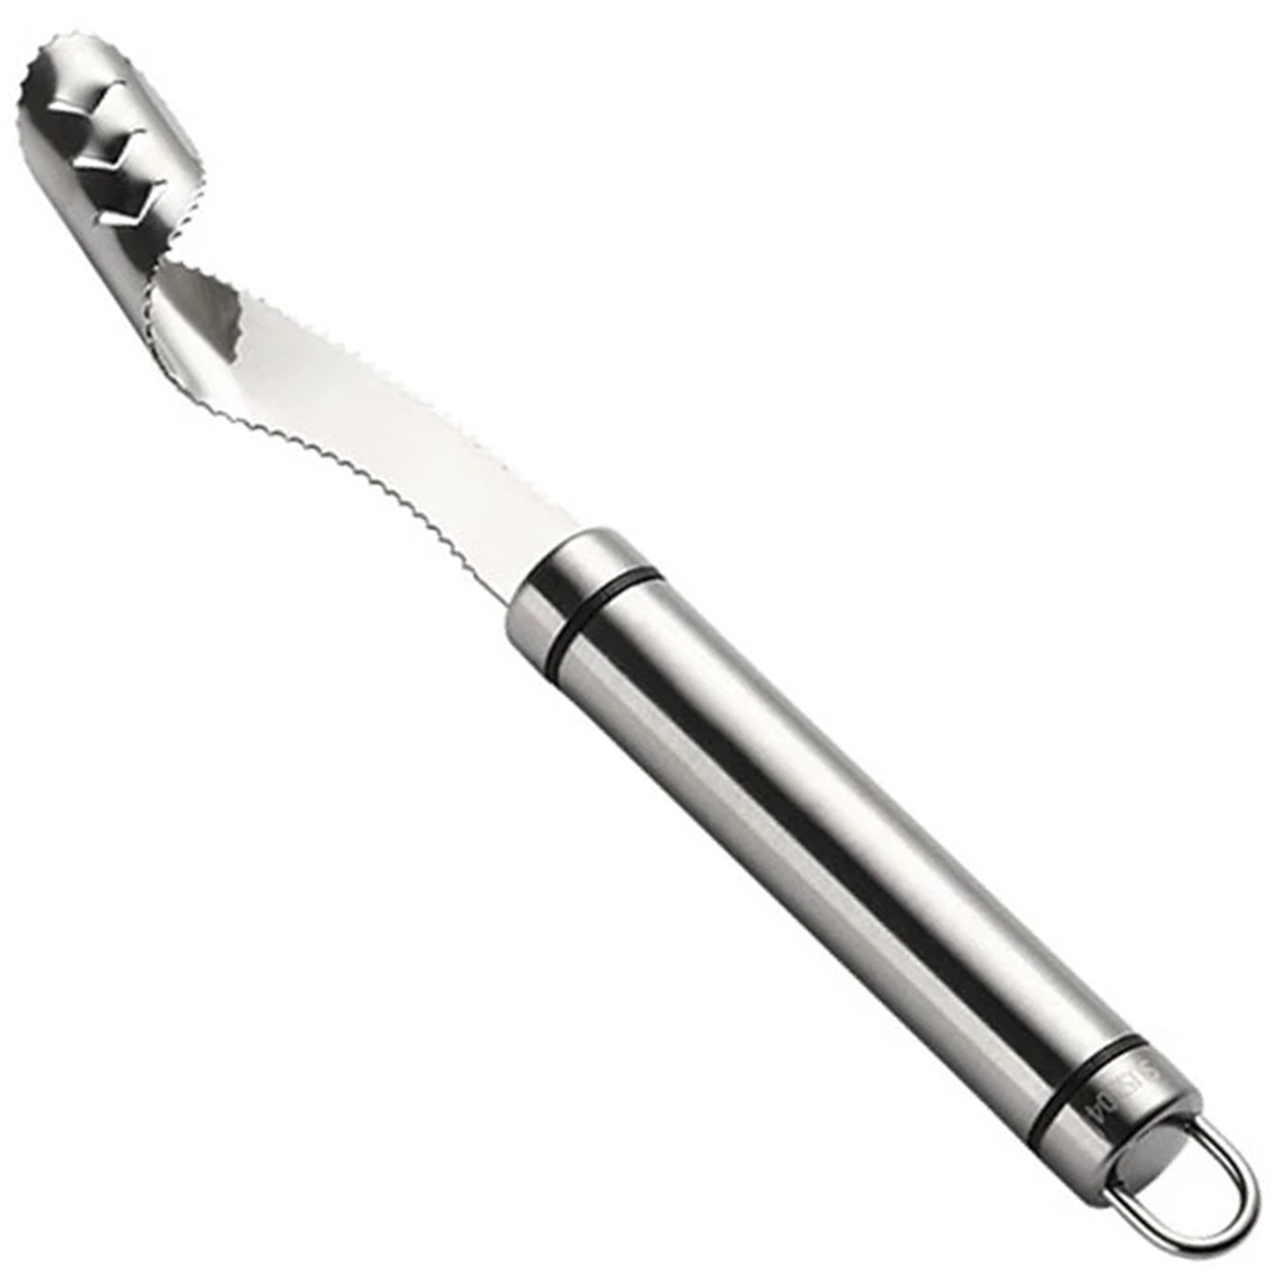 Stainless Steel Vegetable Corer product image